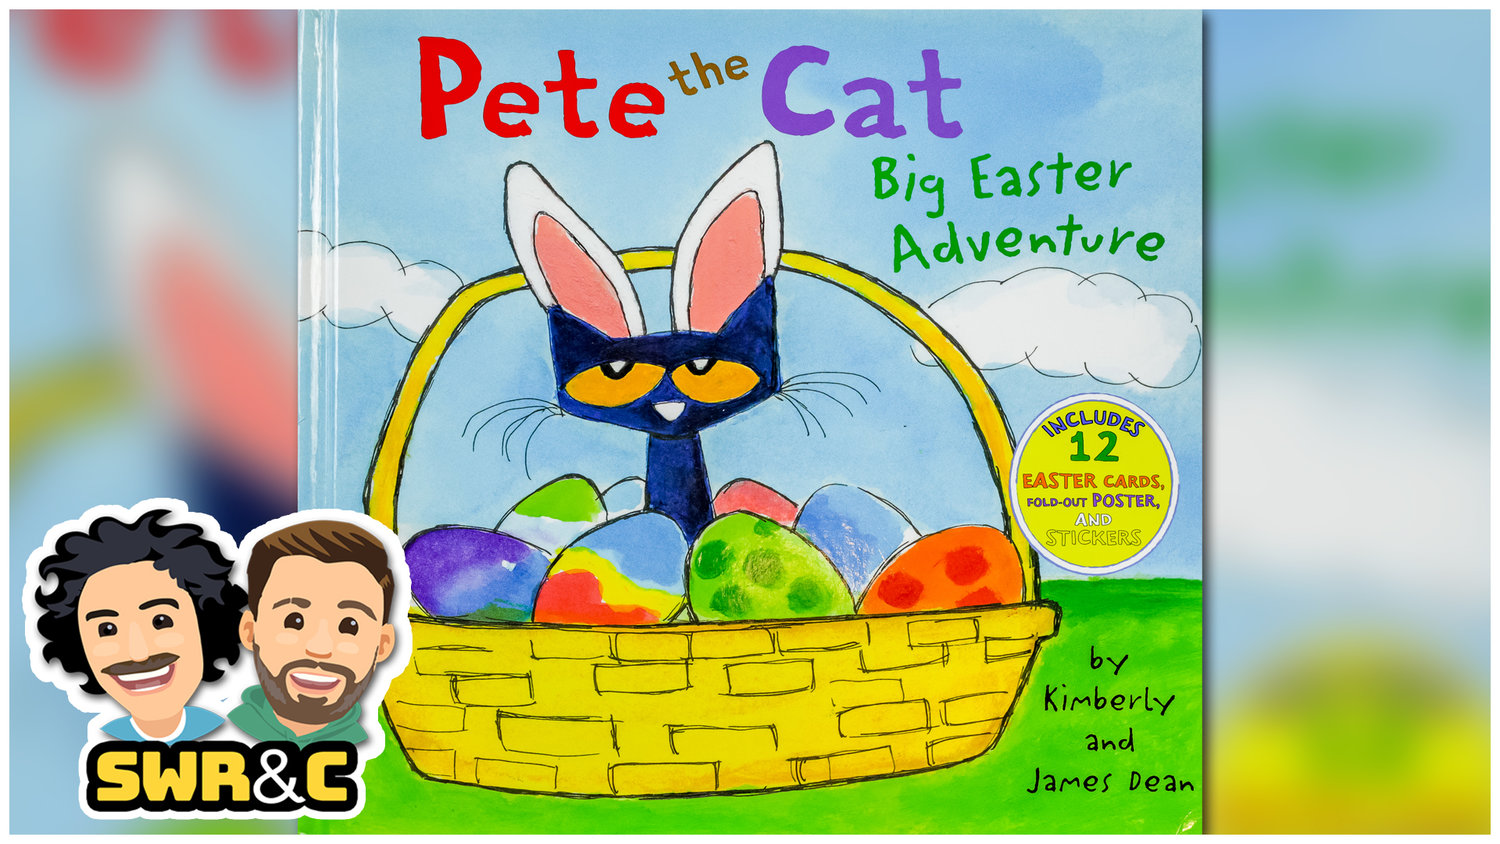 Easter adventure. Pete the Cat big Easter Adventure. Pete the Cat big Easter Adventure workshhet.